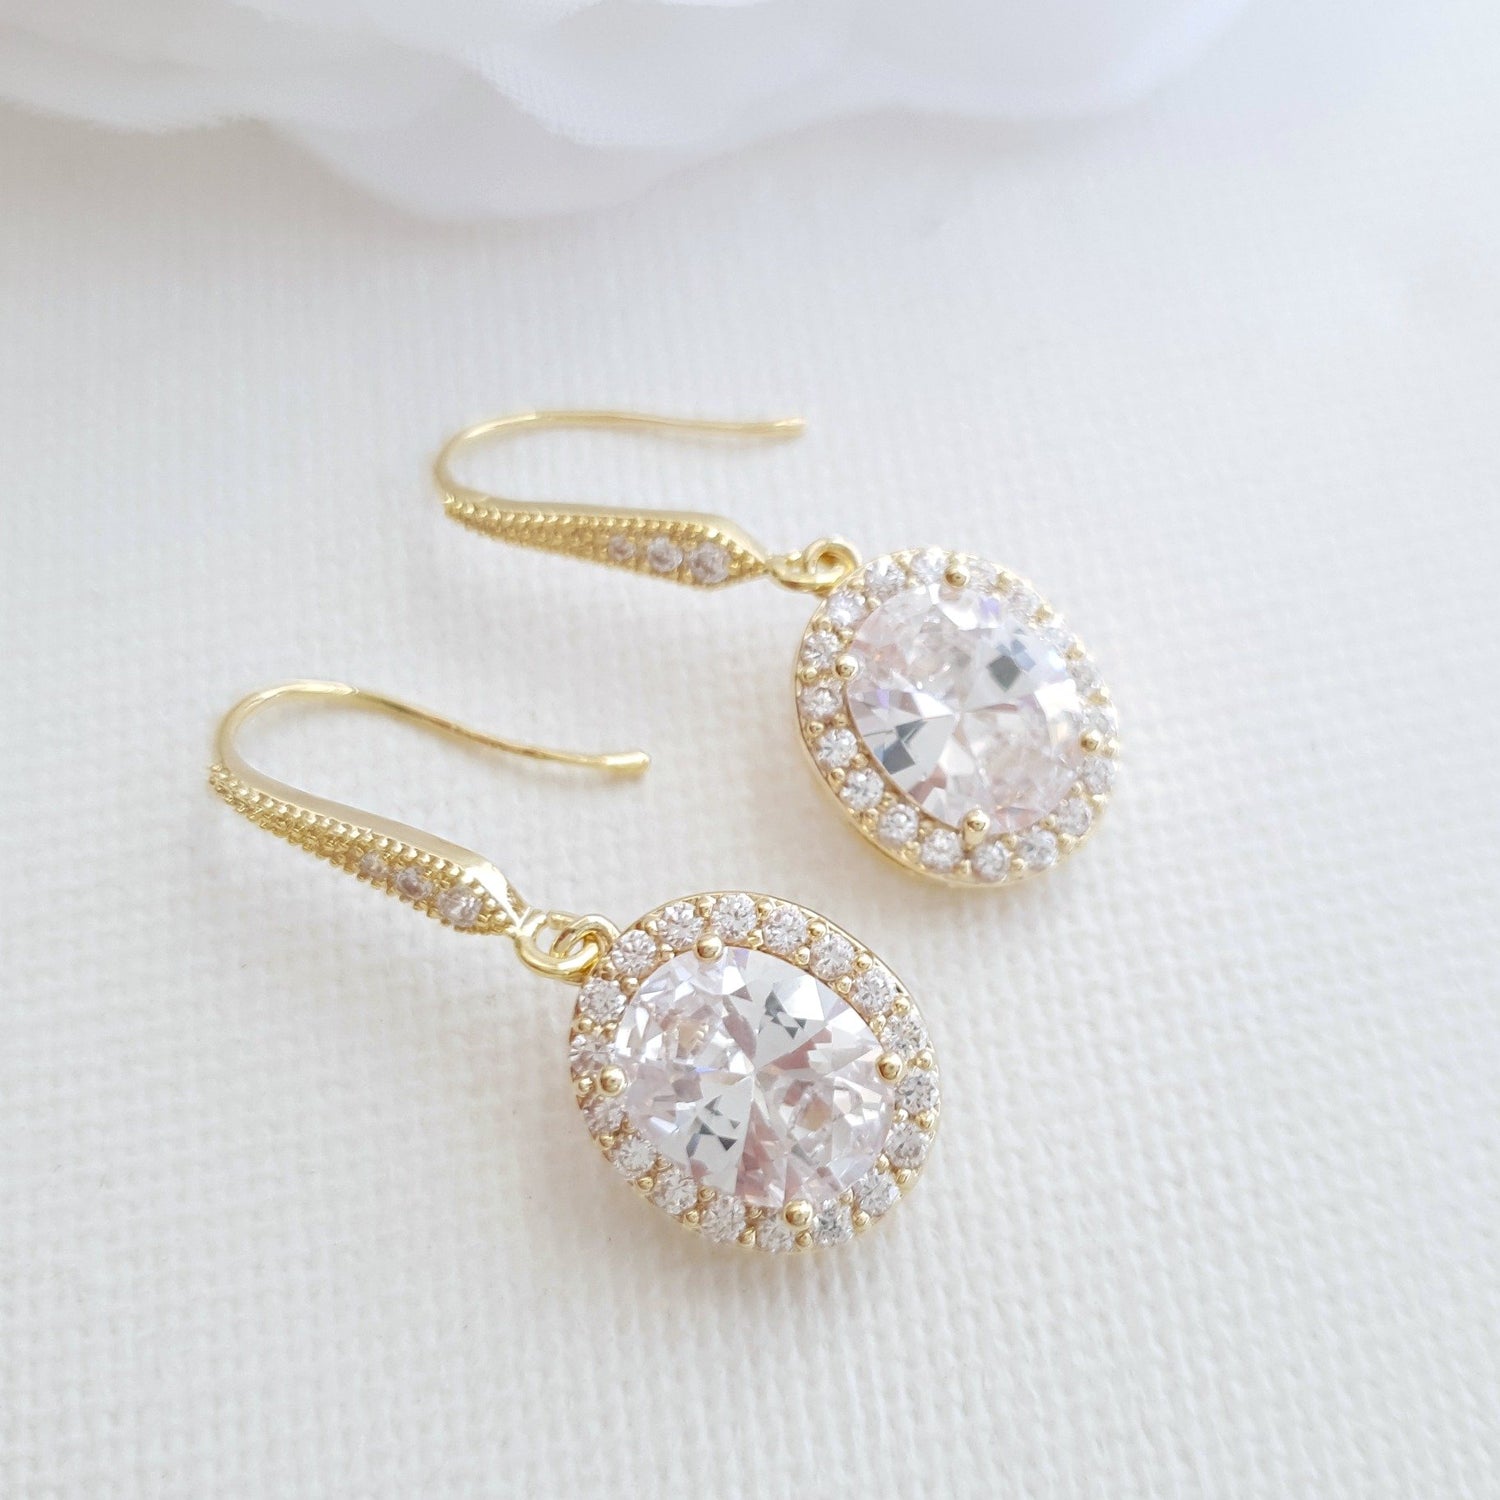 Small Gold Dangle Earrings With Oval CZ Drops-Emily - PoetryDesigns